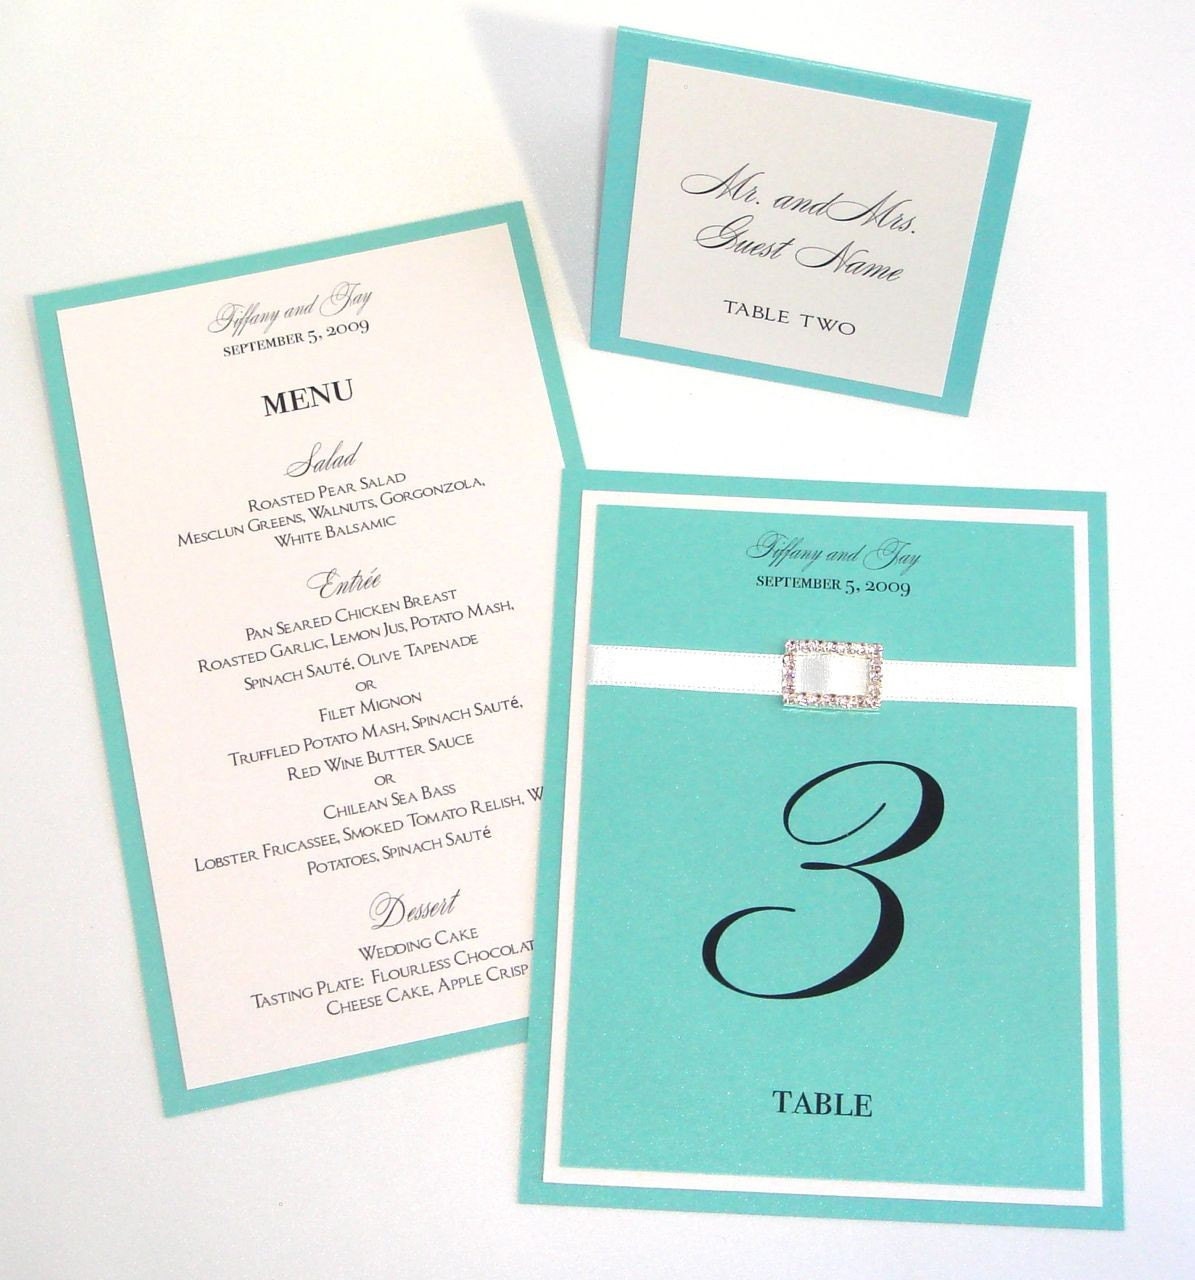 Let's See Those Menu Cards and or Programs wedding reception menu cards